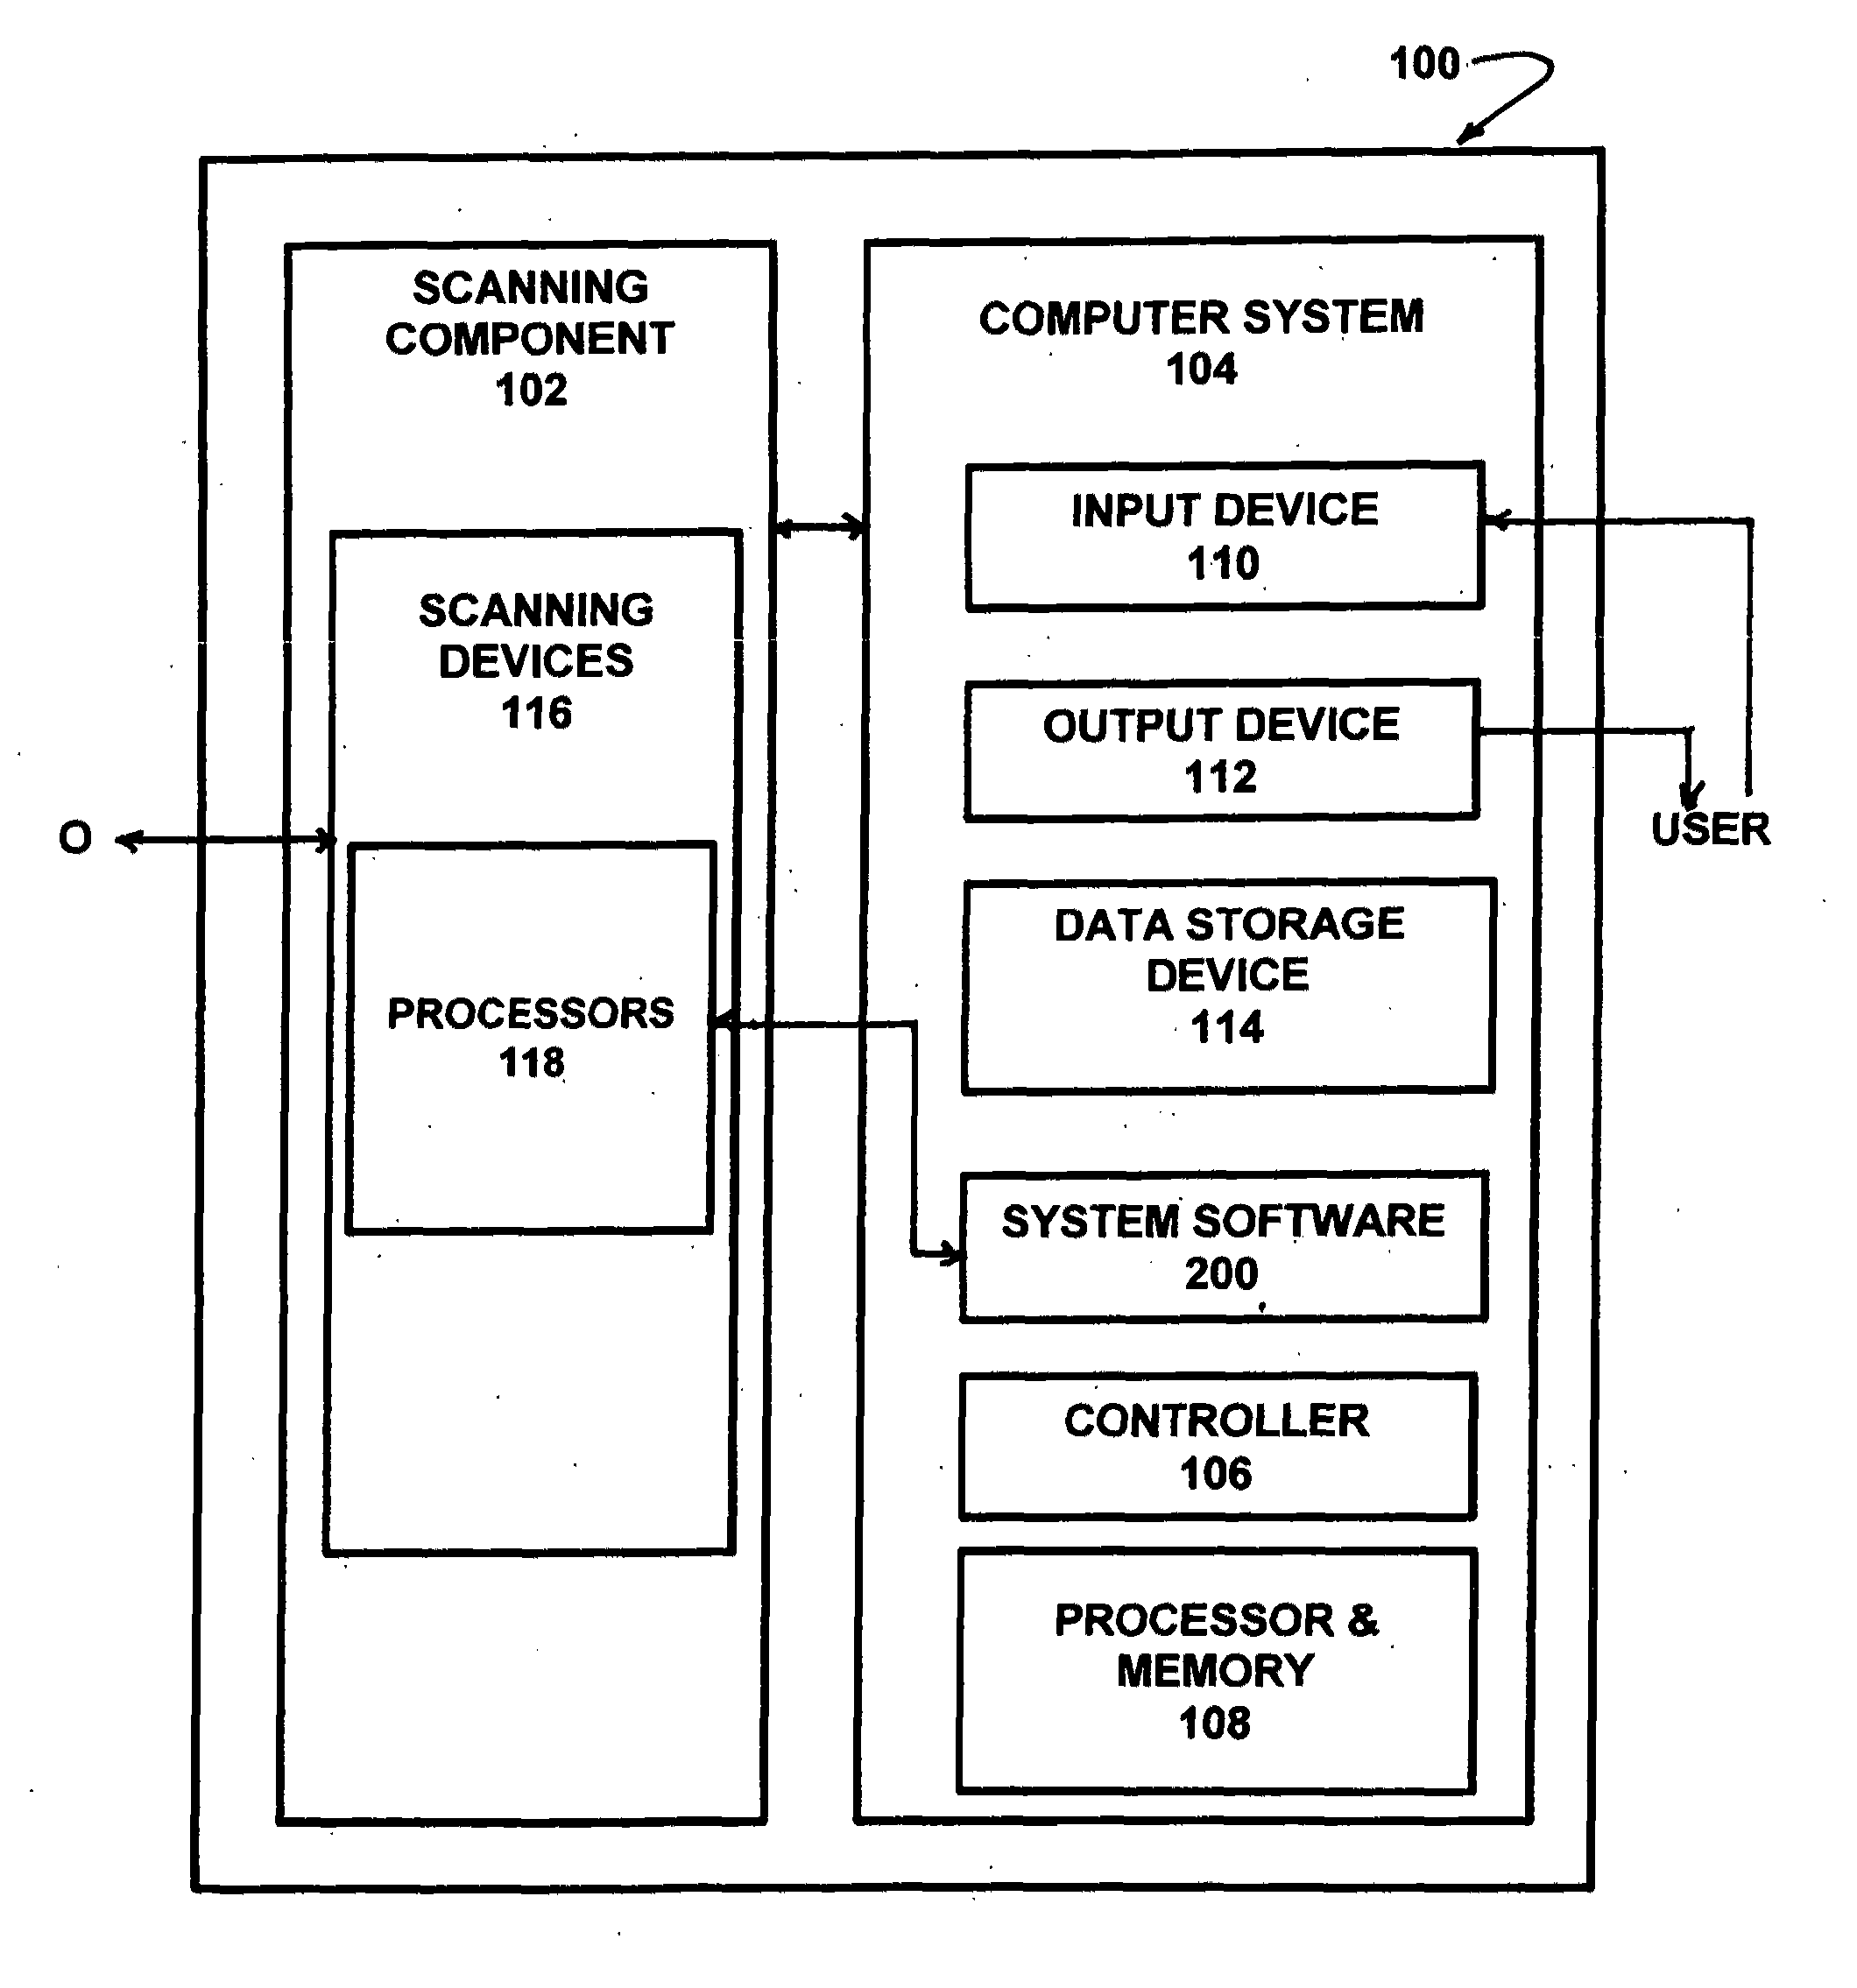 Surface data acquisition, storage, and assessment system